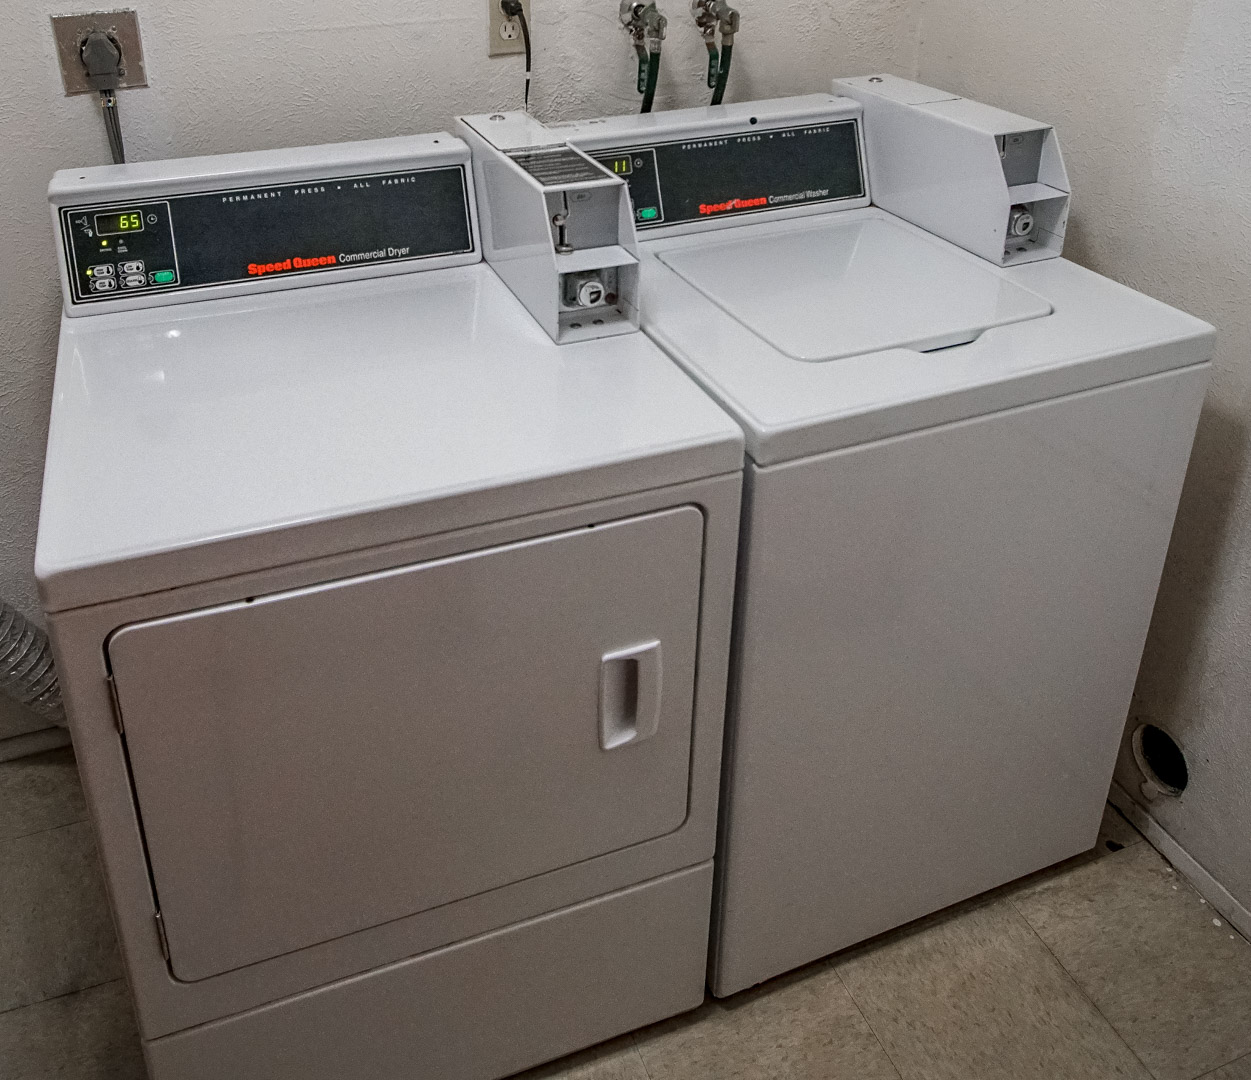 Washer and Dryers are available at VRI's See the Sea in San Diego, CA.